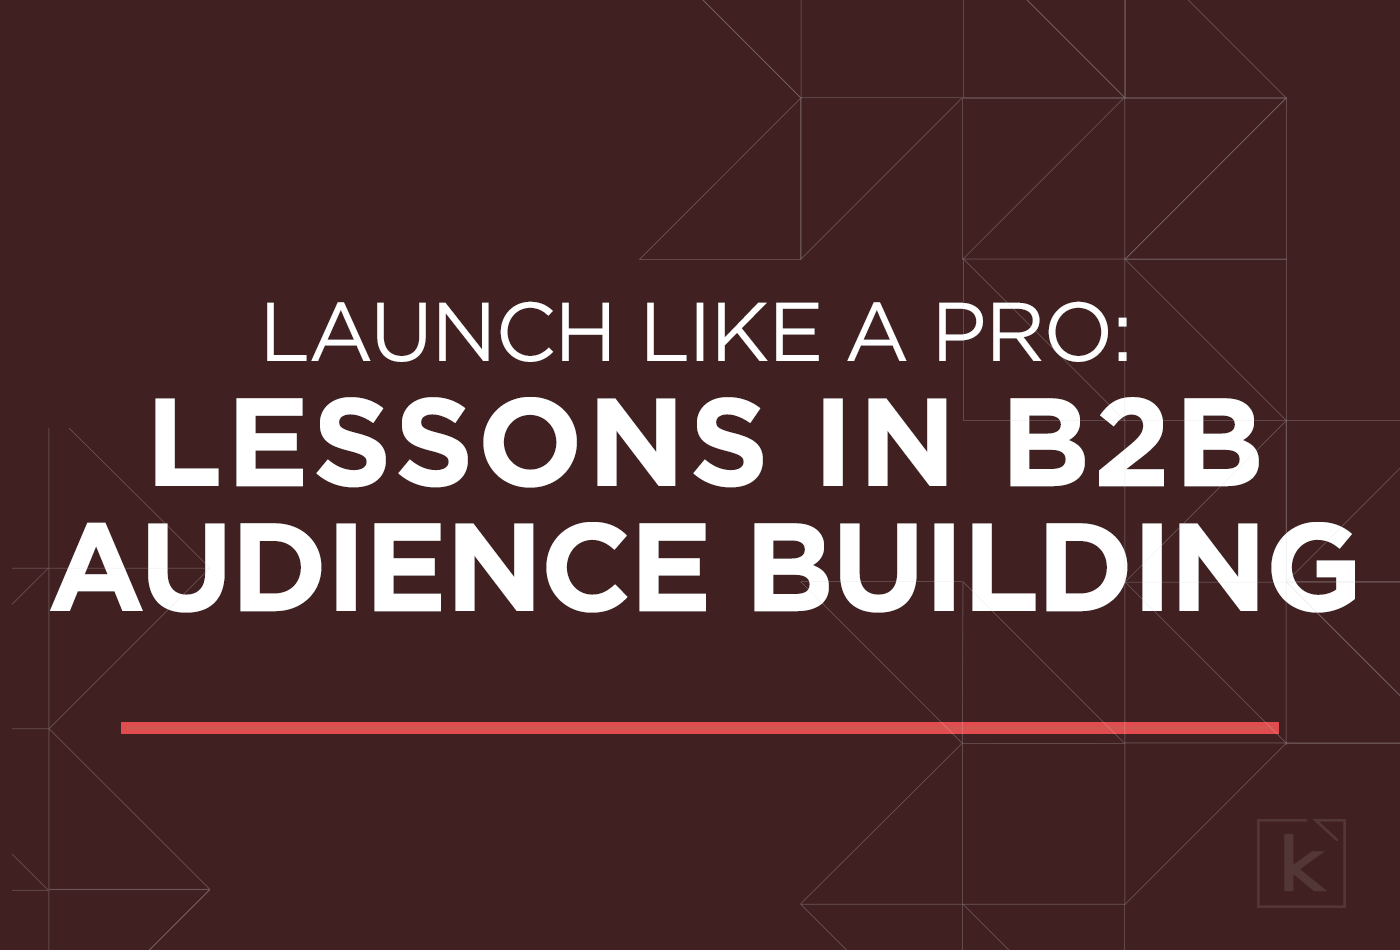 launch-lessons-b2b-audience-building